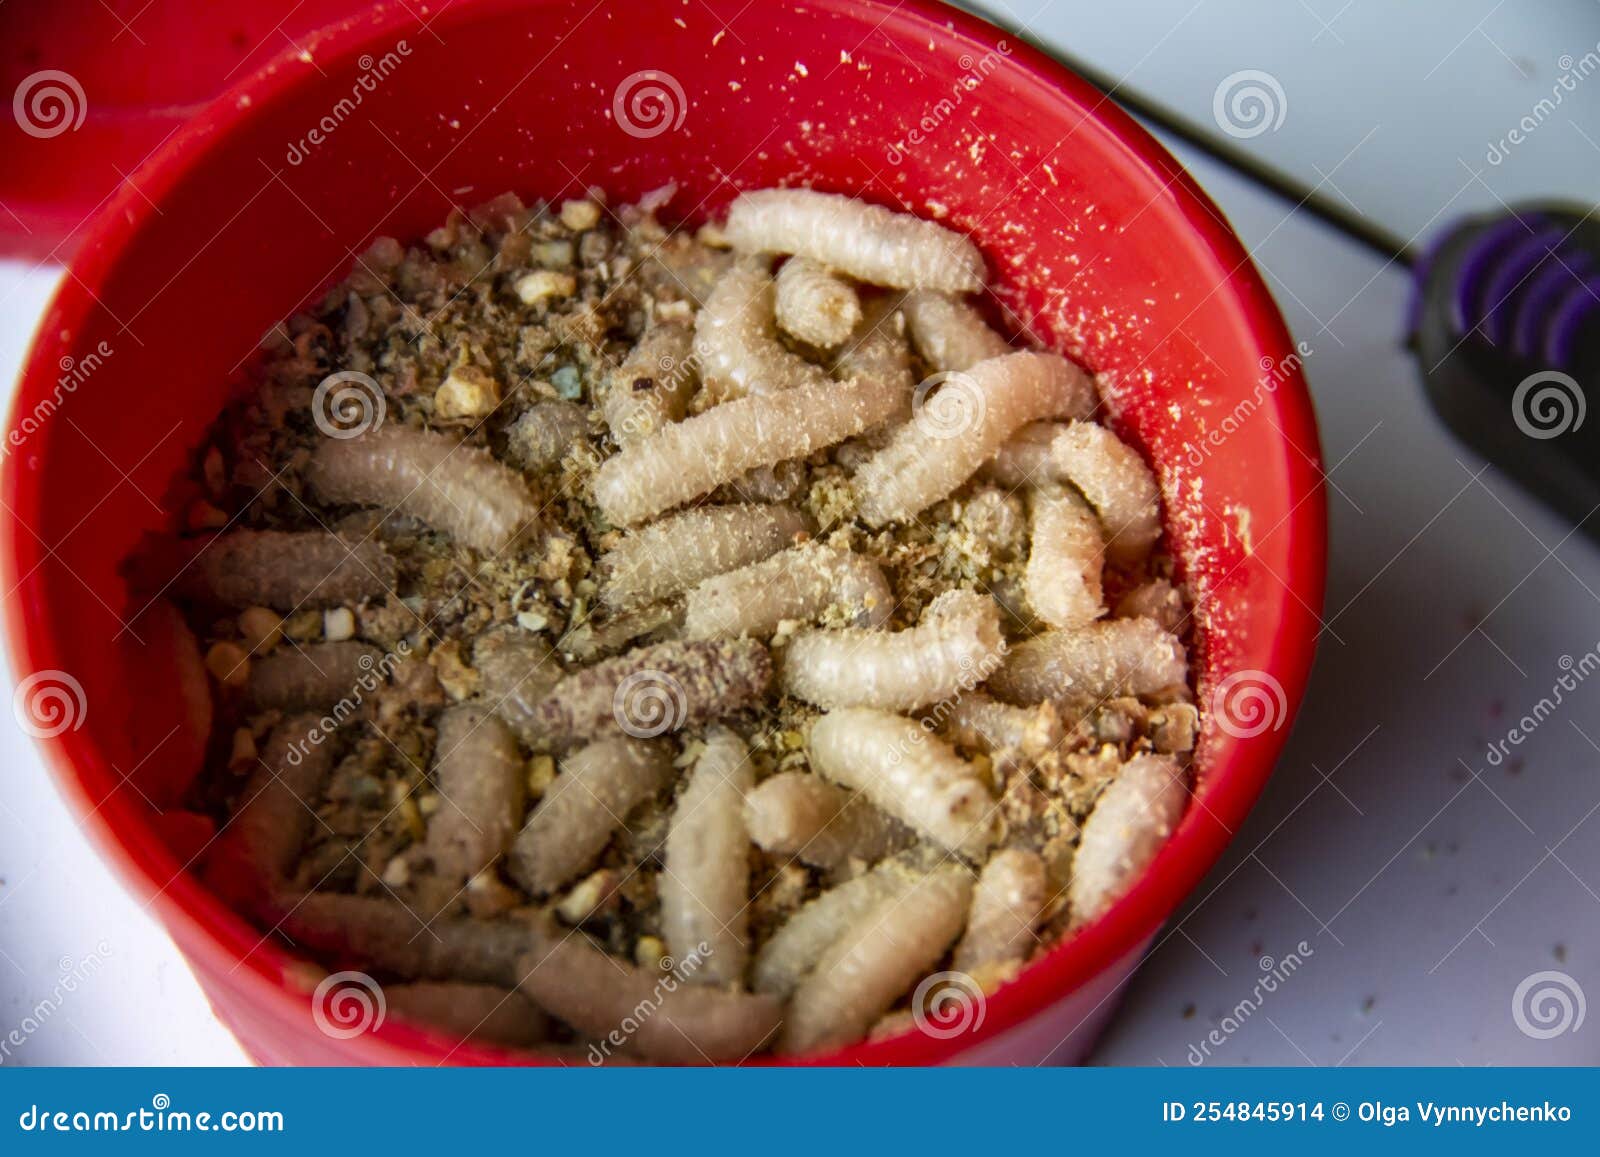 Live Fly Larvae in the Red Plastic Plate As Bait for Catching Fish. the  Maggots for Fishing Against Background Stock Photo - Image of bunch,  hermetia: 254845914